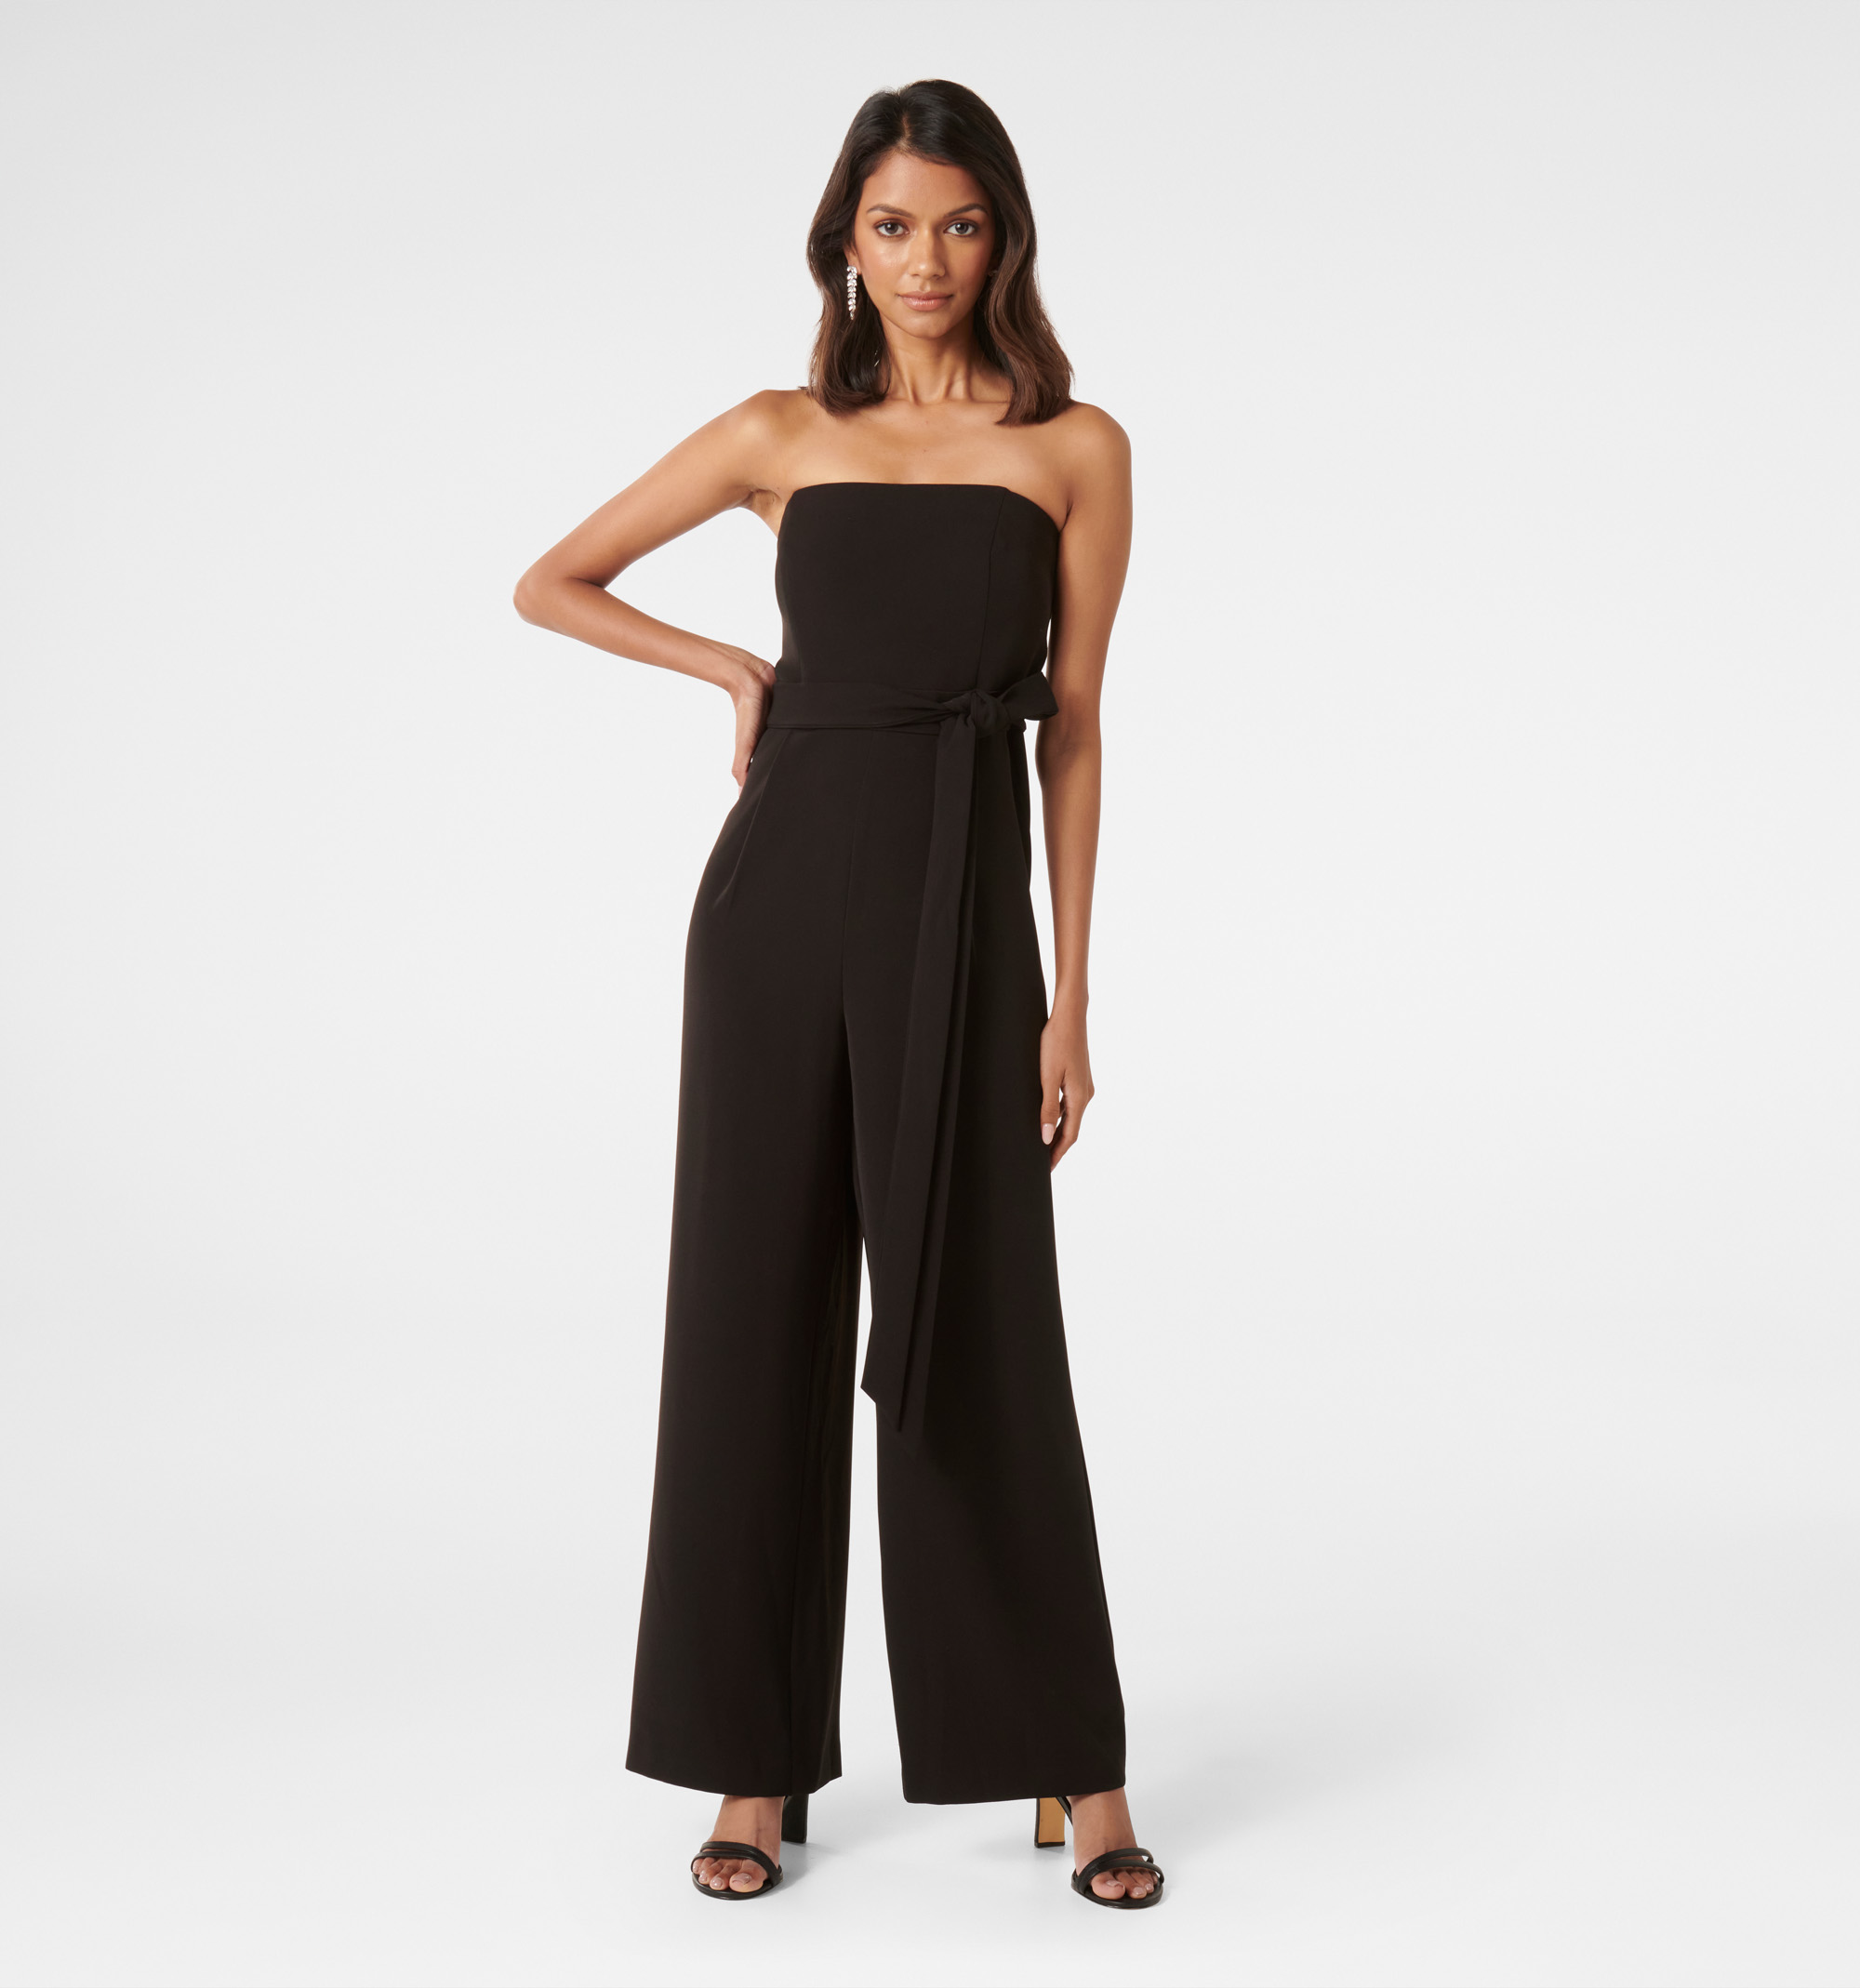 Plus Size Sexy Knit Strapless Wide Leg Summer Occasion Jumpsuit